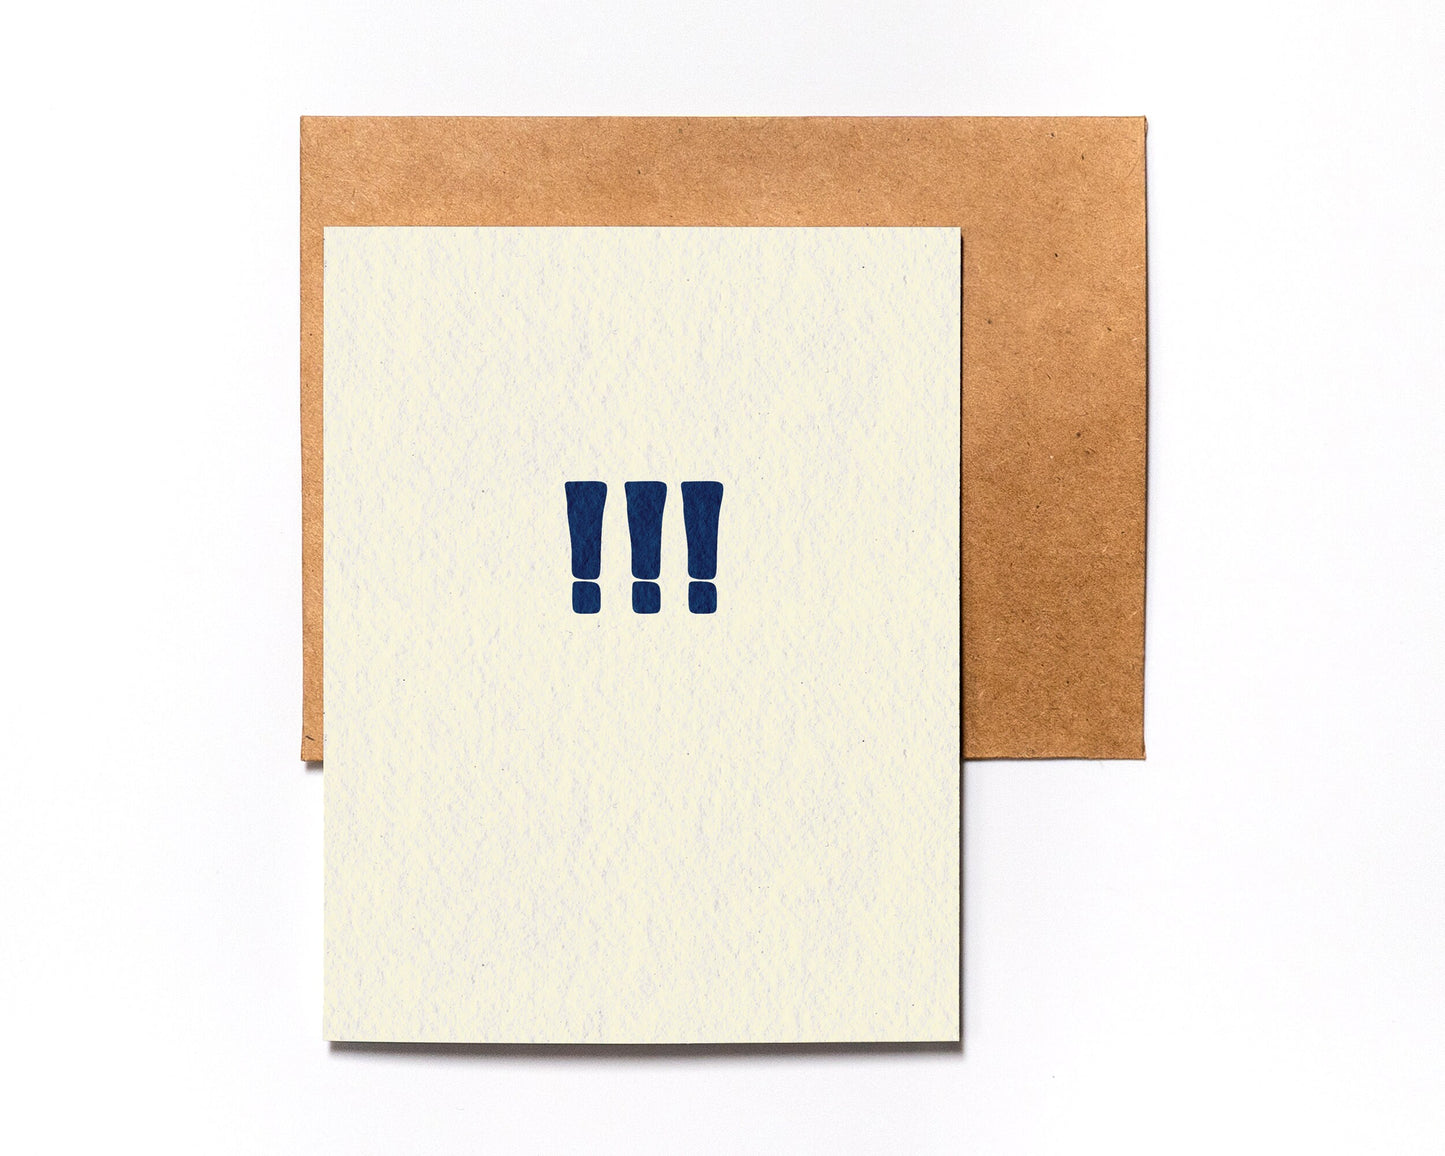 Hype Greeting Card - Congrats - Excited - Happy Birthday - Proud of You - Celebrate - Minimalist Greeting Card